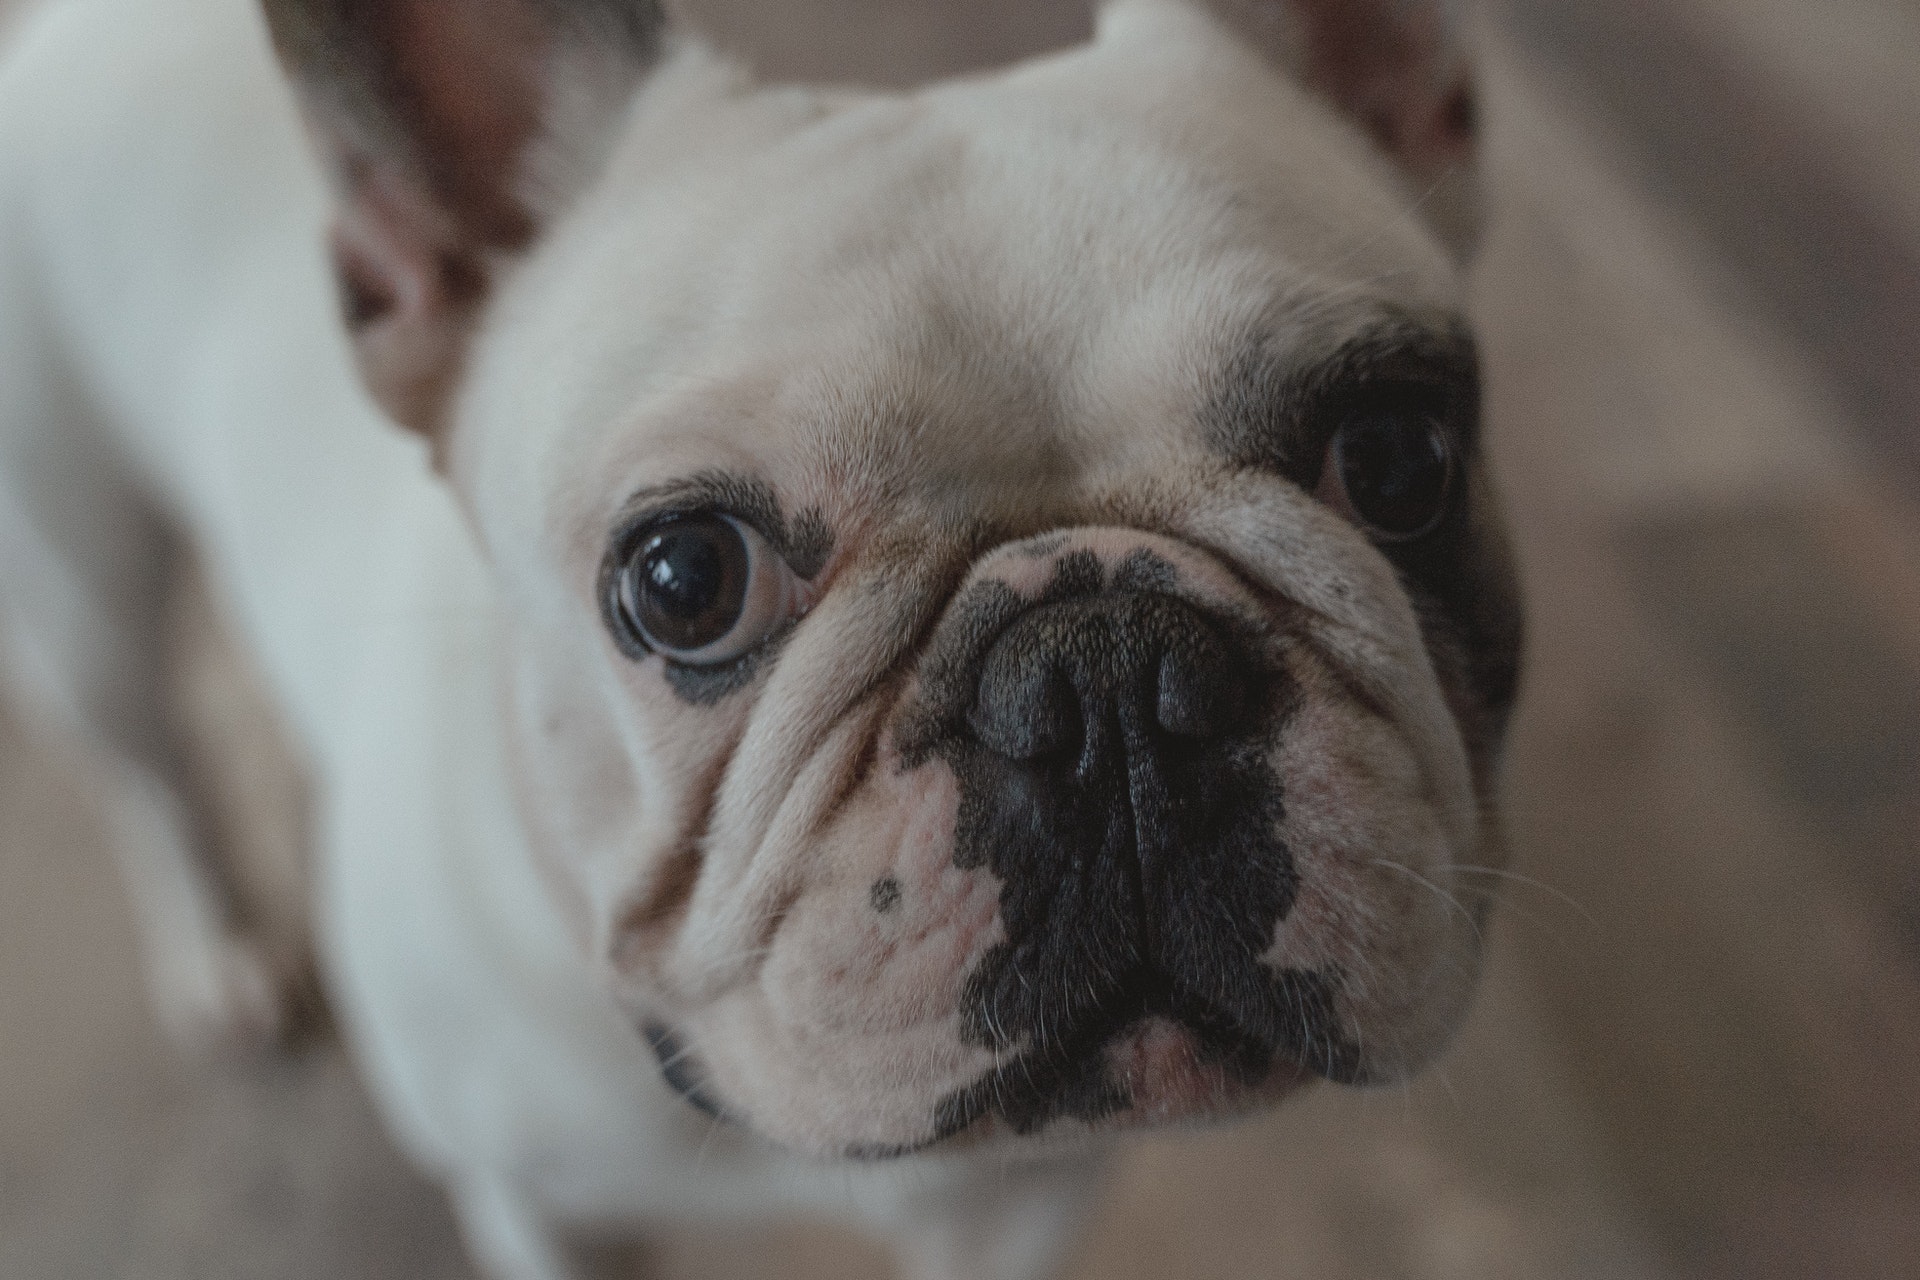 why do french bulldogs cry so much?